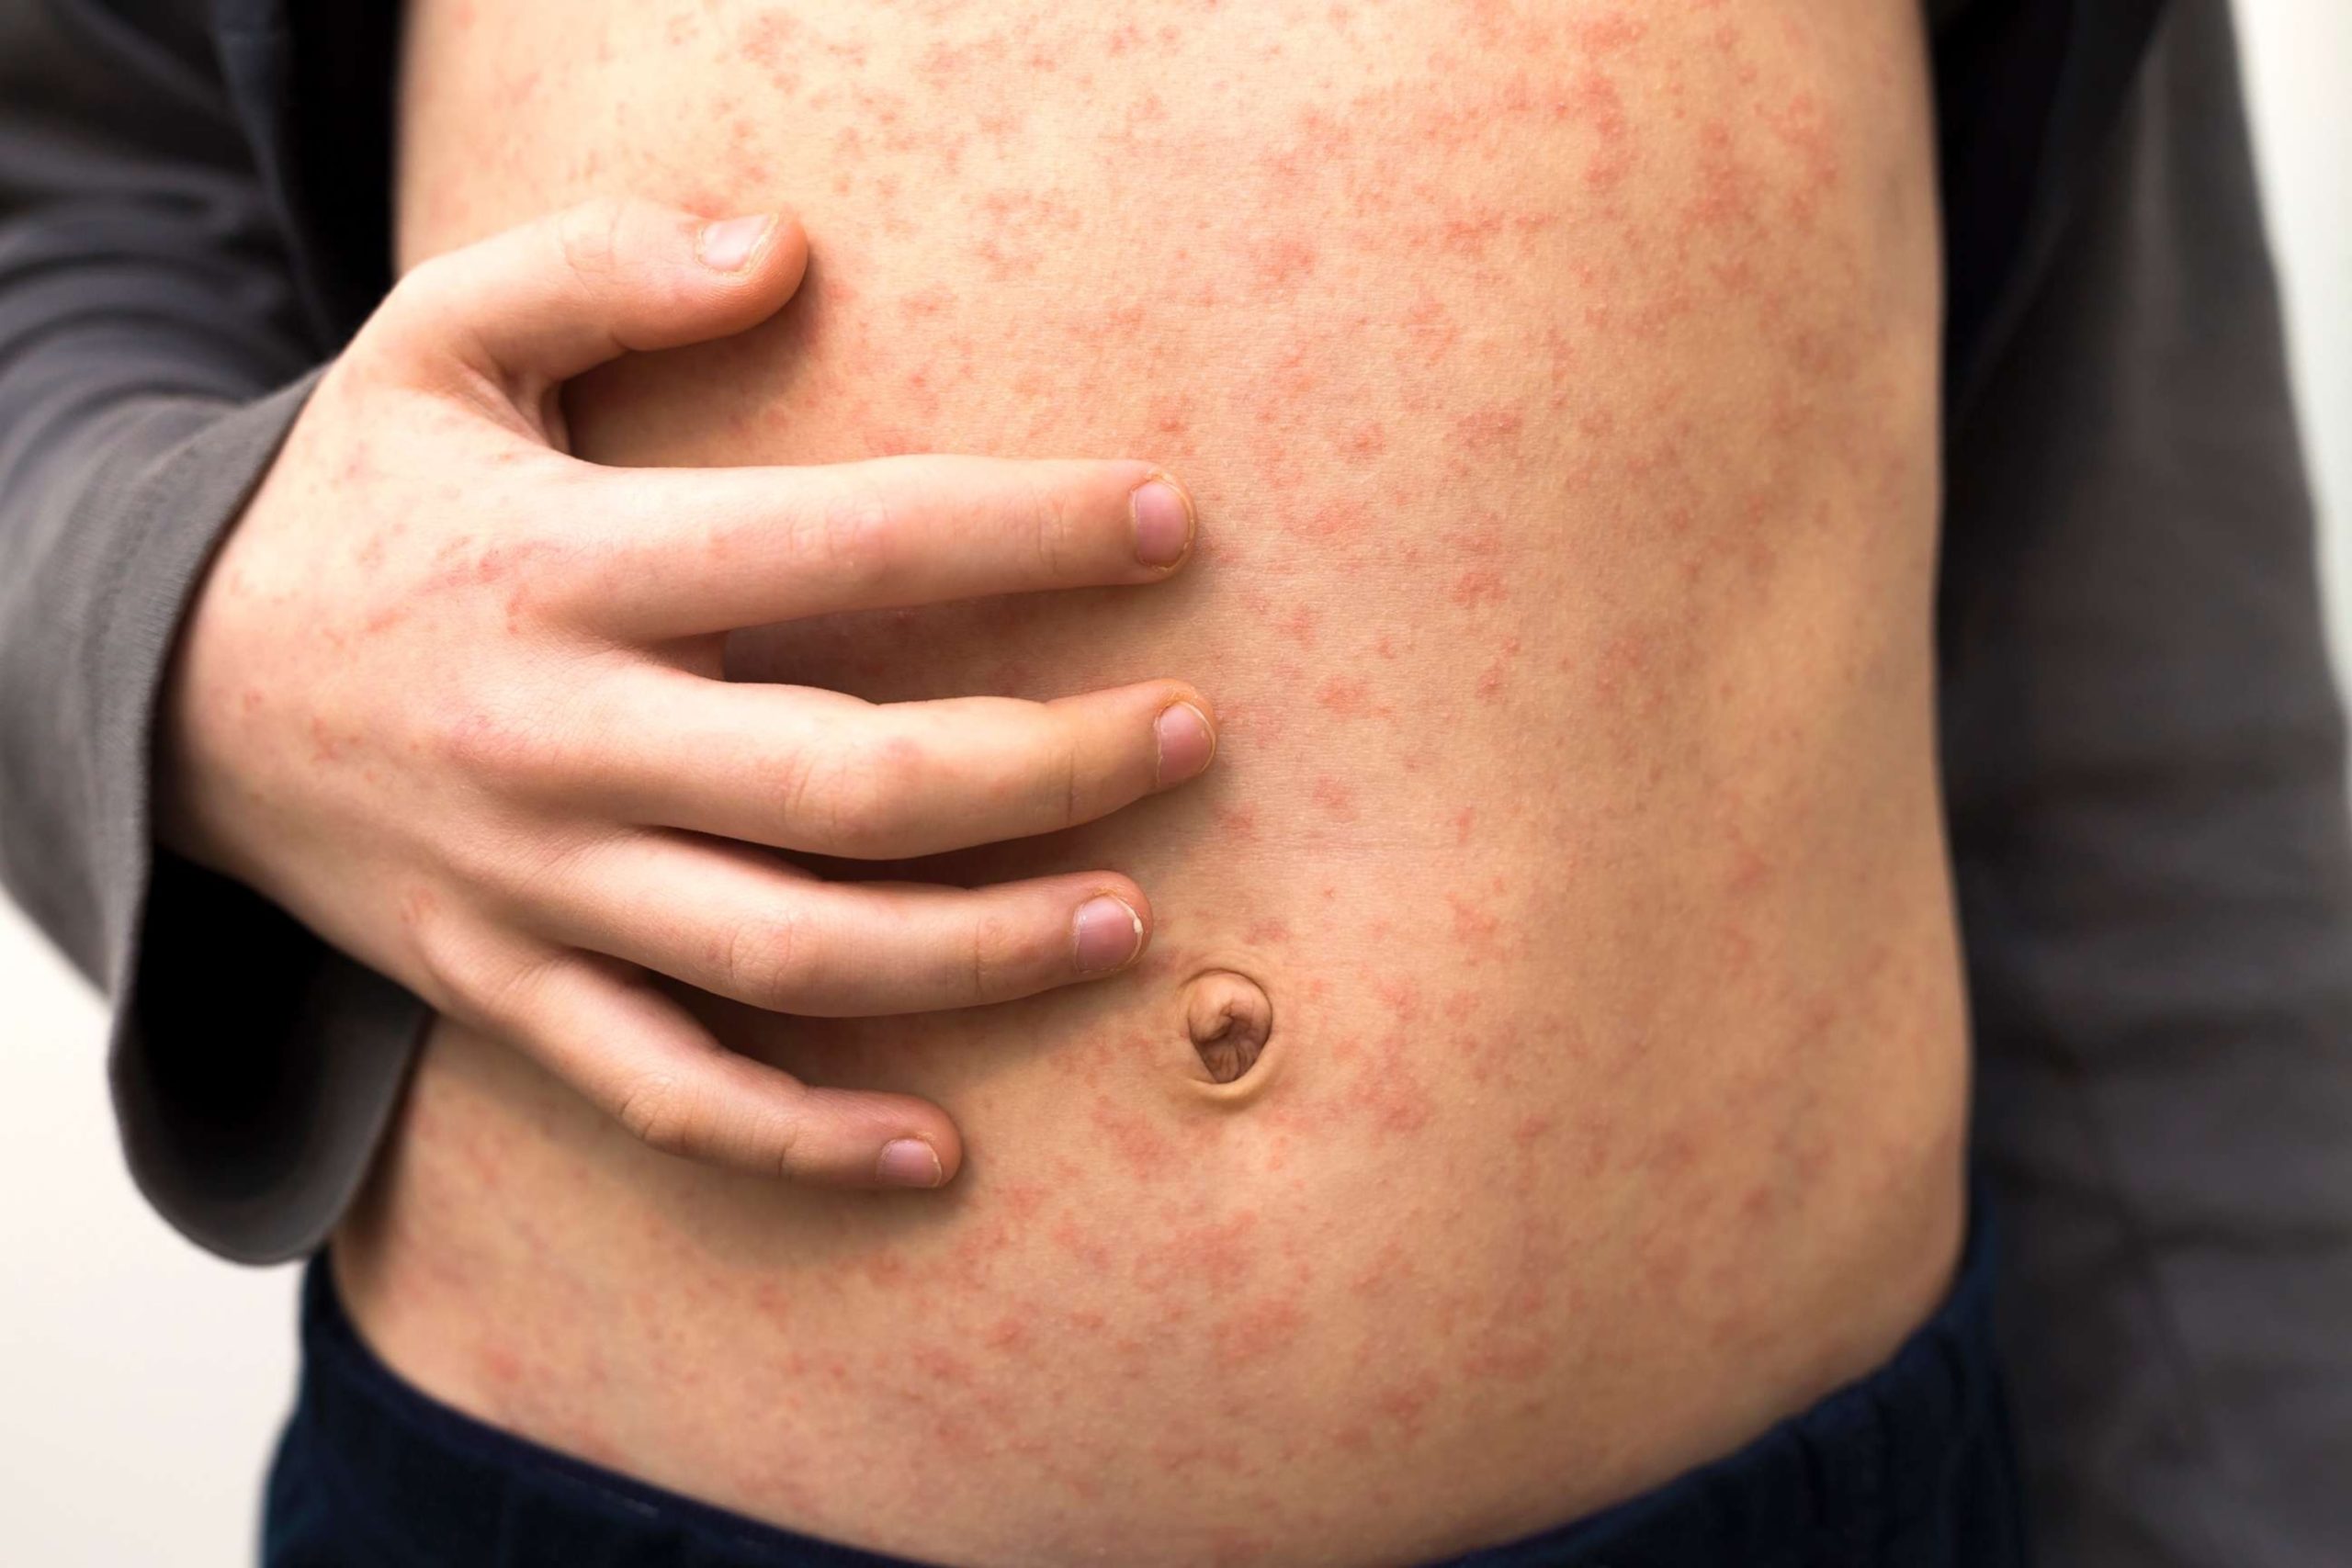 Increasing Number of Measles Cases Prompt CDC's Advisory for Vigilance among Health Care Workers